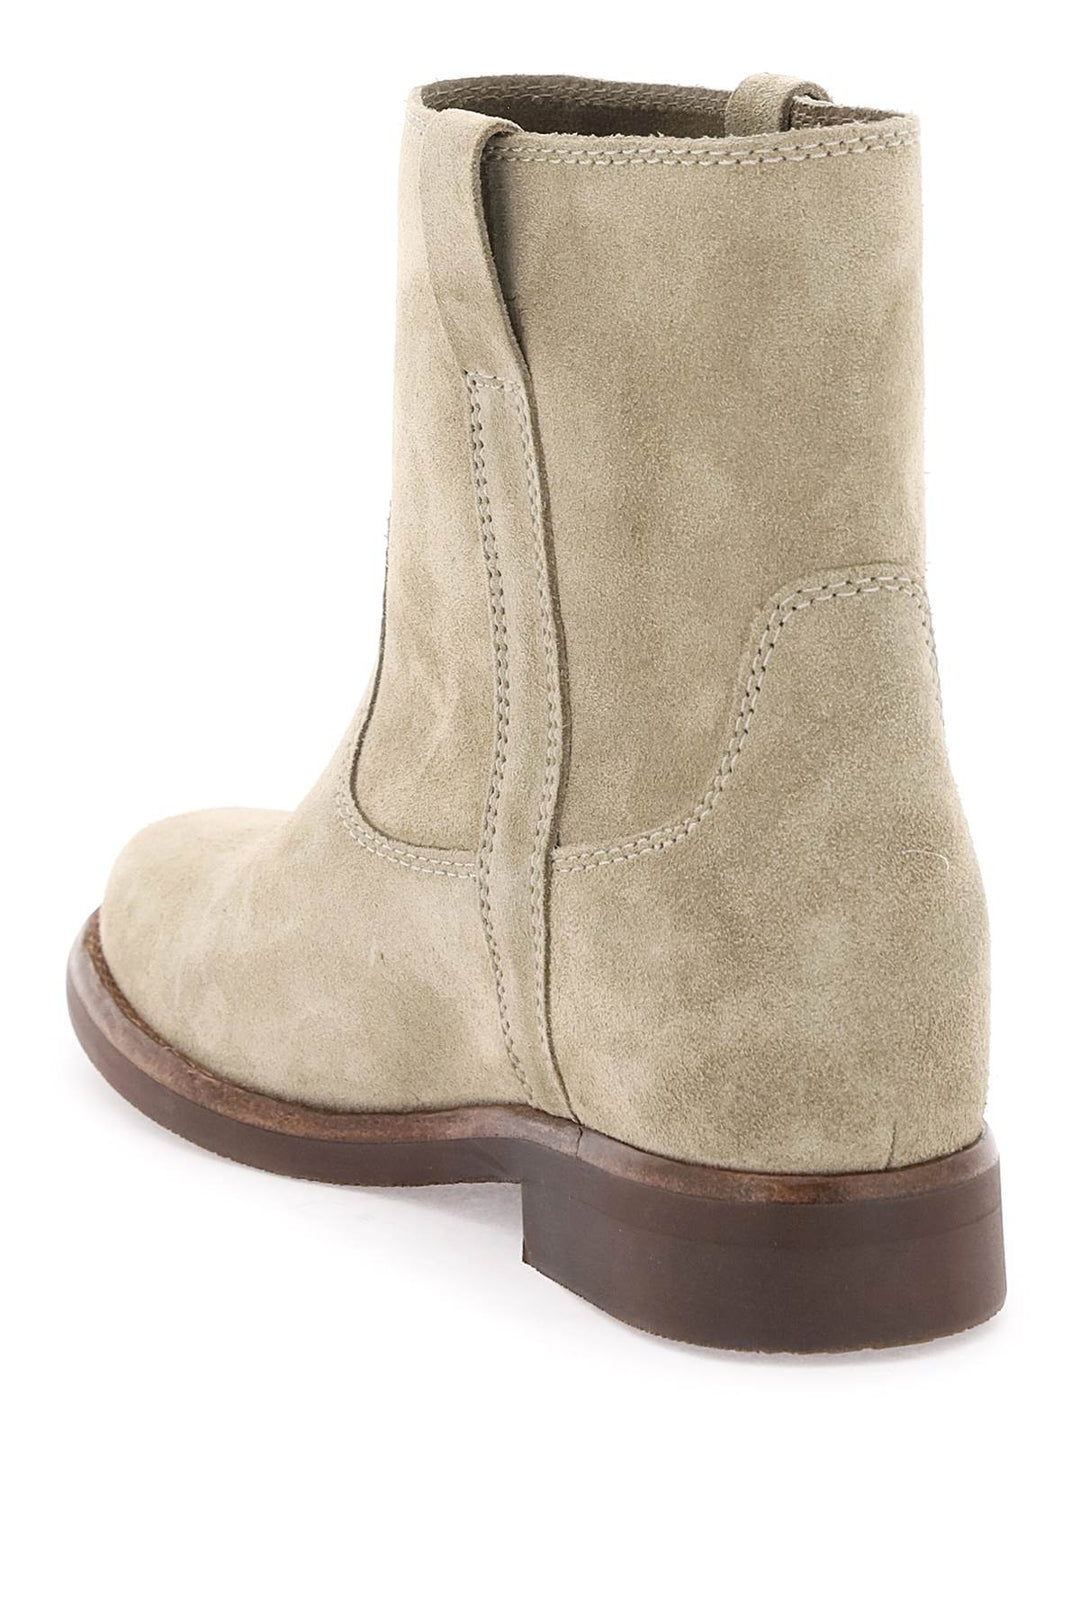 Isabel Marant 'Susee' Ankle Boots   Beige